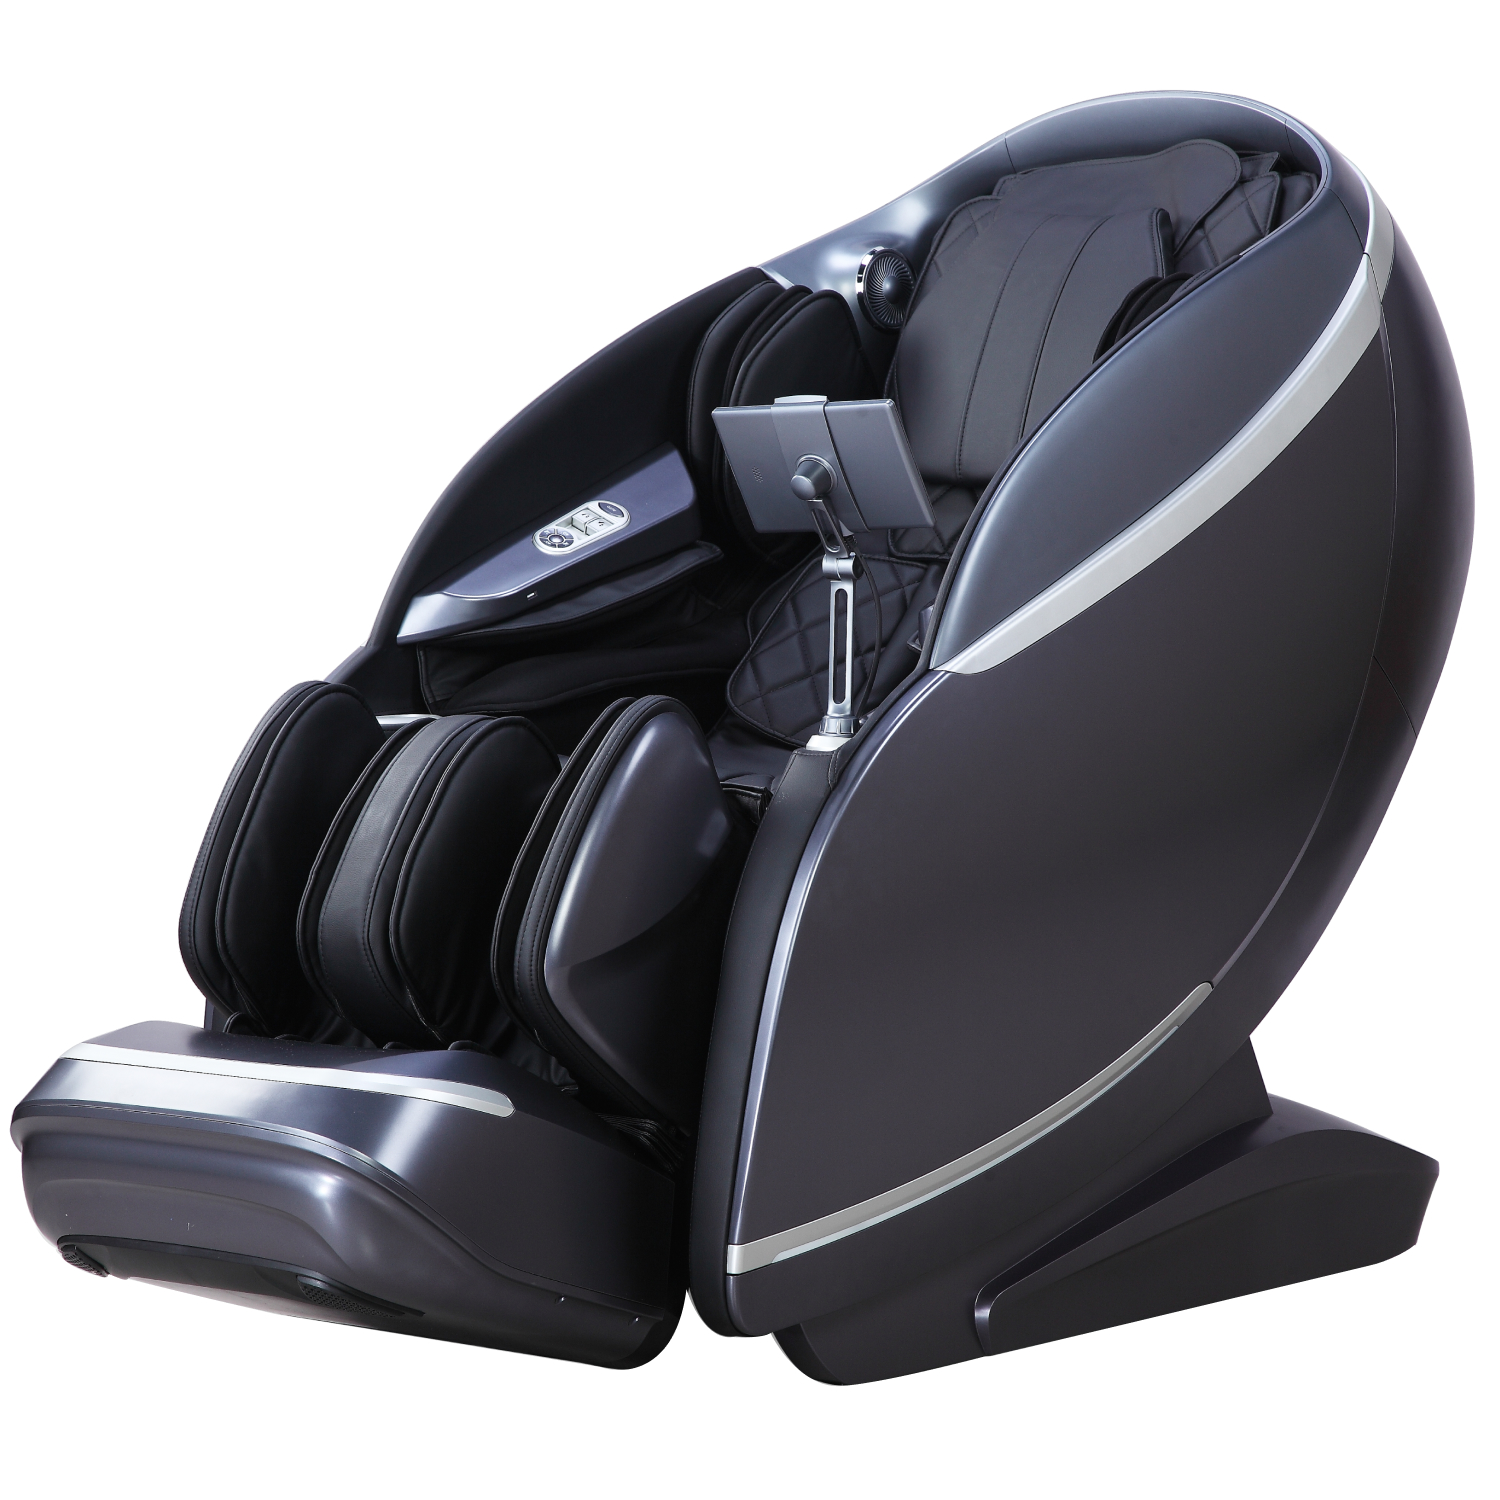 The brand new THERAPEUTIX 4D Massage Chair BLACK